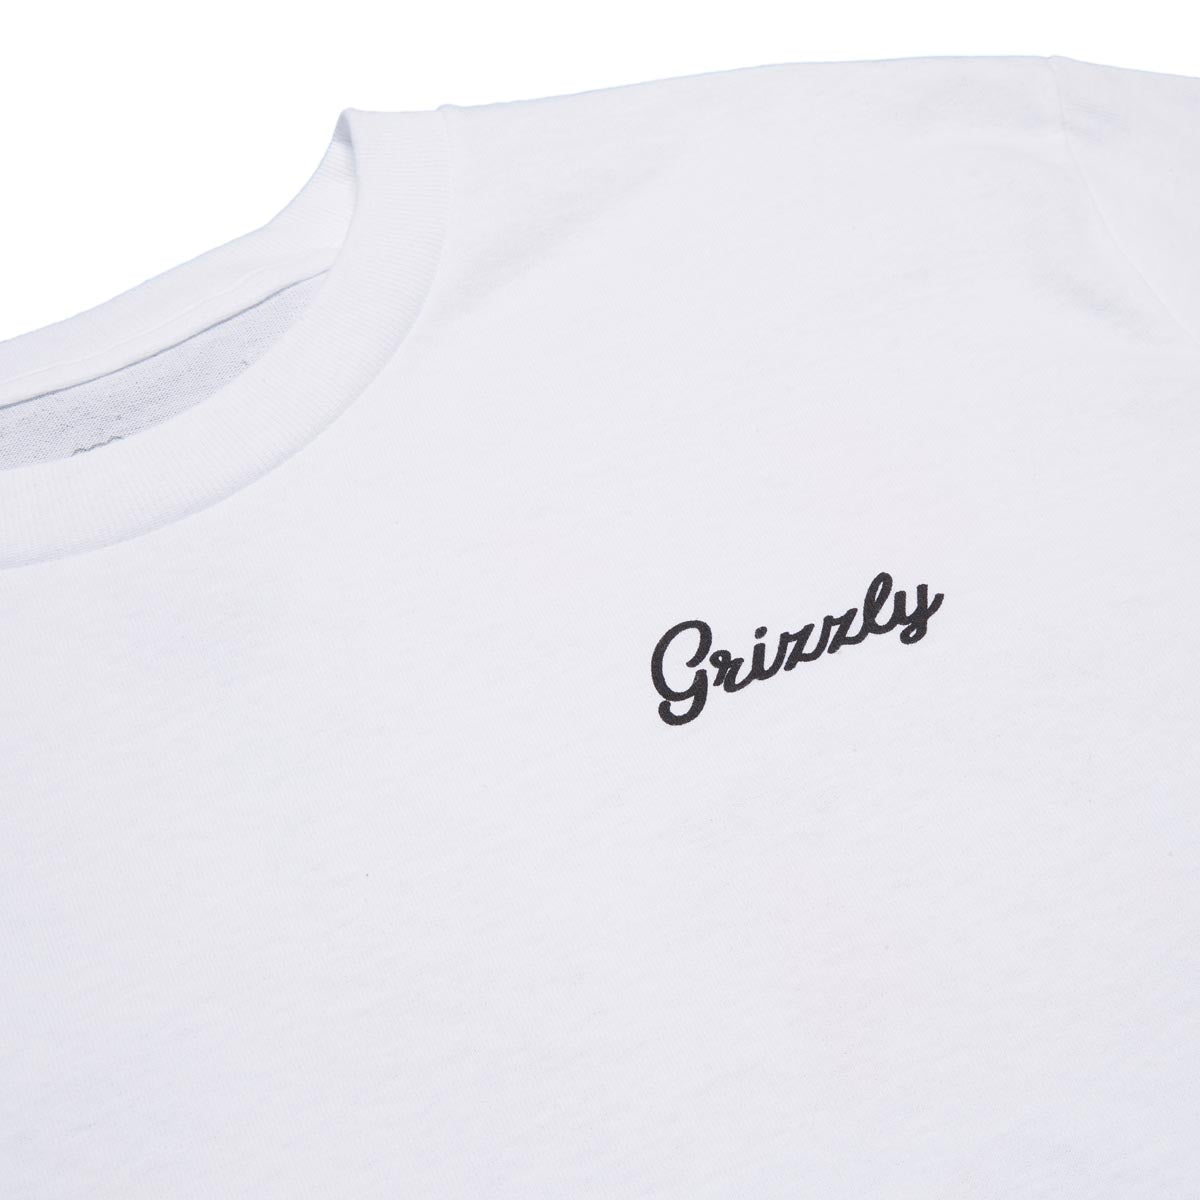 Grizzly Rolling Deep T-Shirt - White image 3